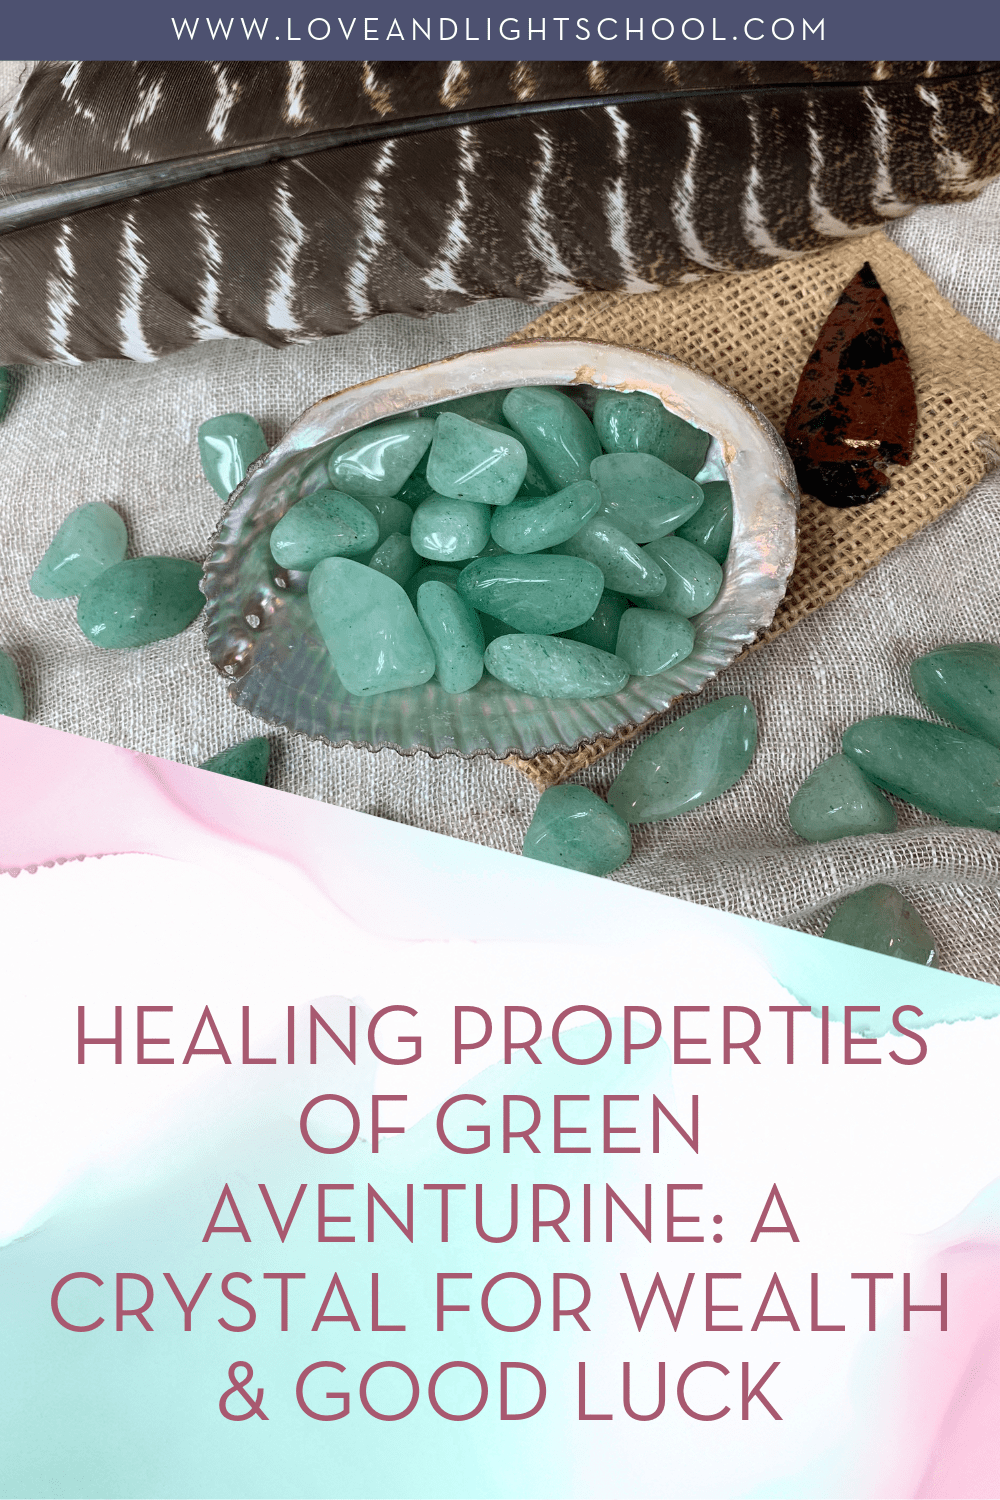 Healing Properties of Green Aventurine: A Crystal for Wealth & Good